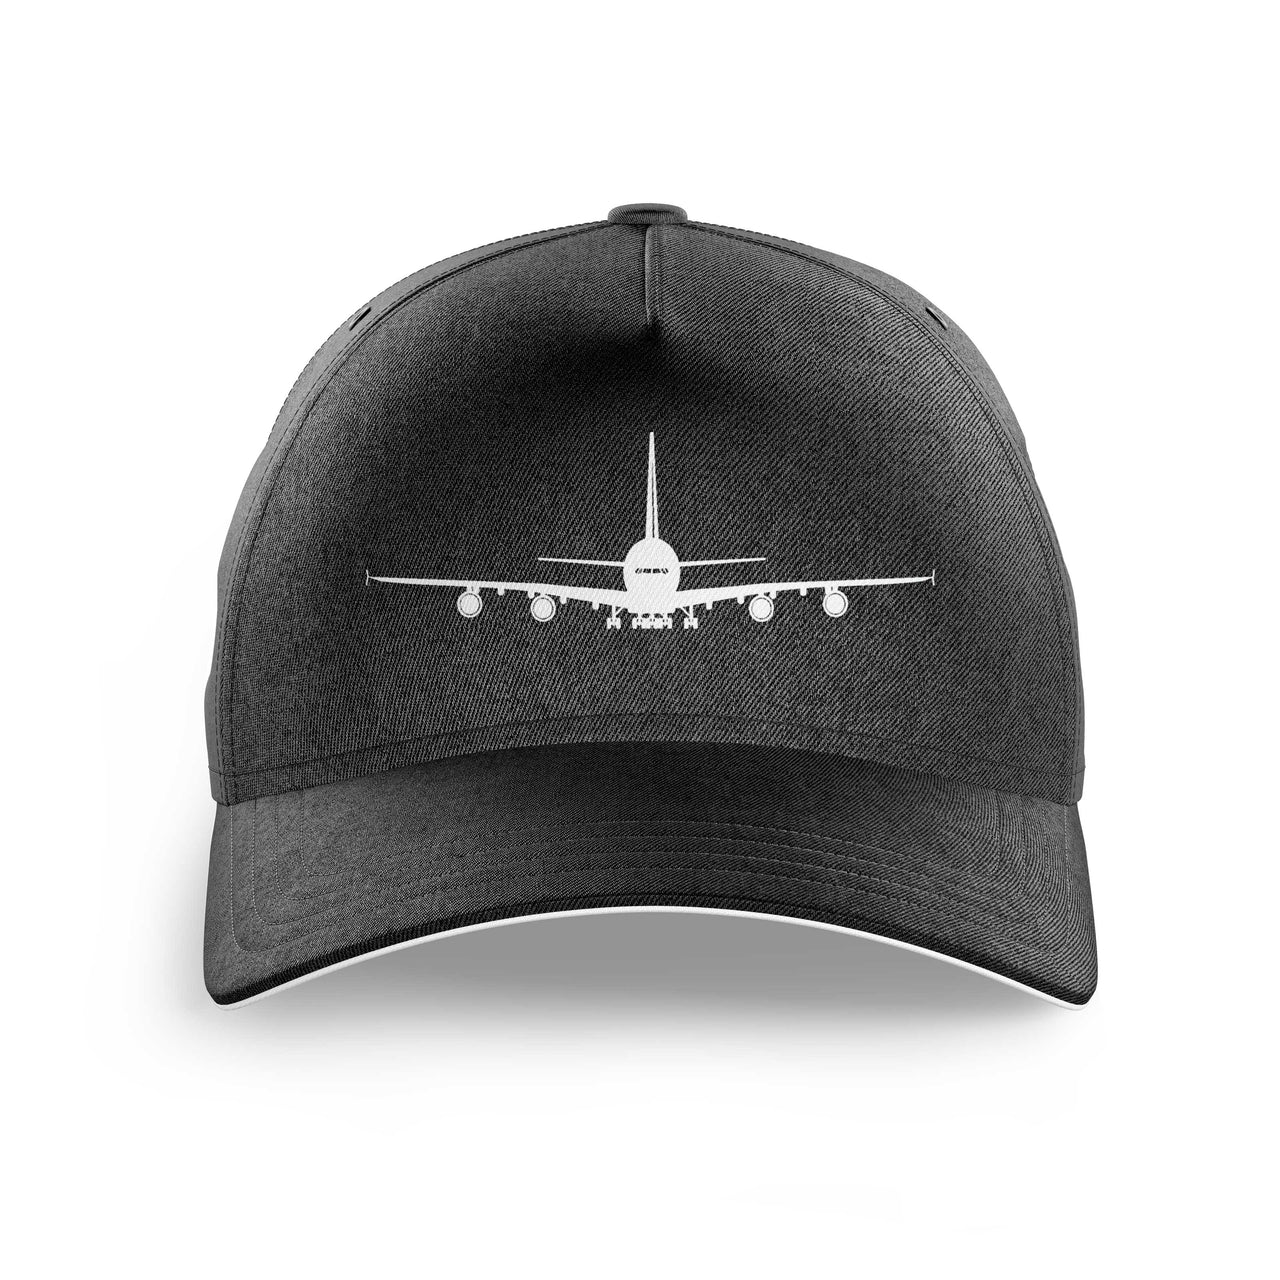 Airbus A380 Silhouette Printed Hats